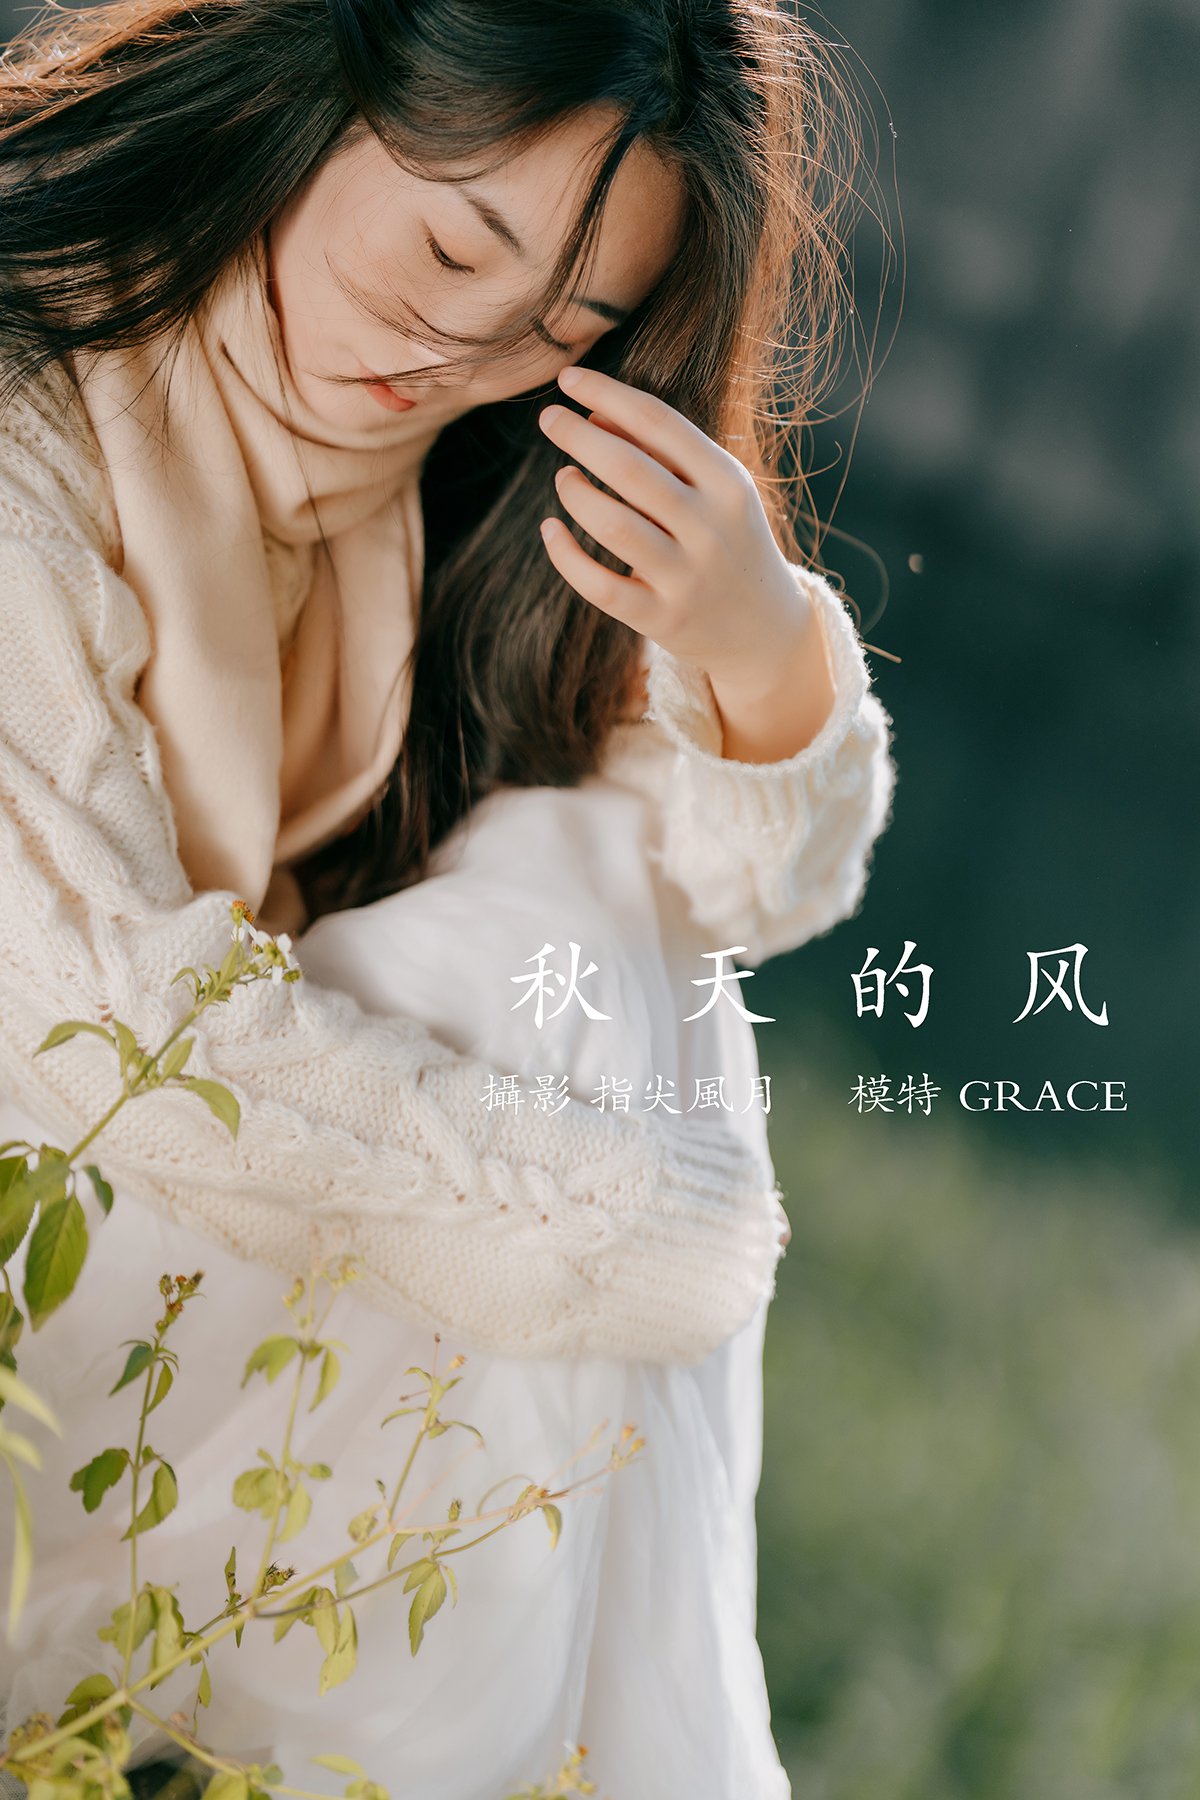 YiTuYu艺图语 Vol.622 GRACE